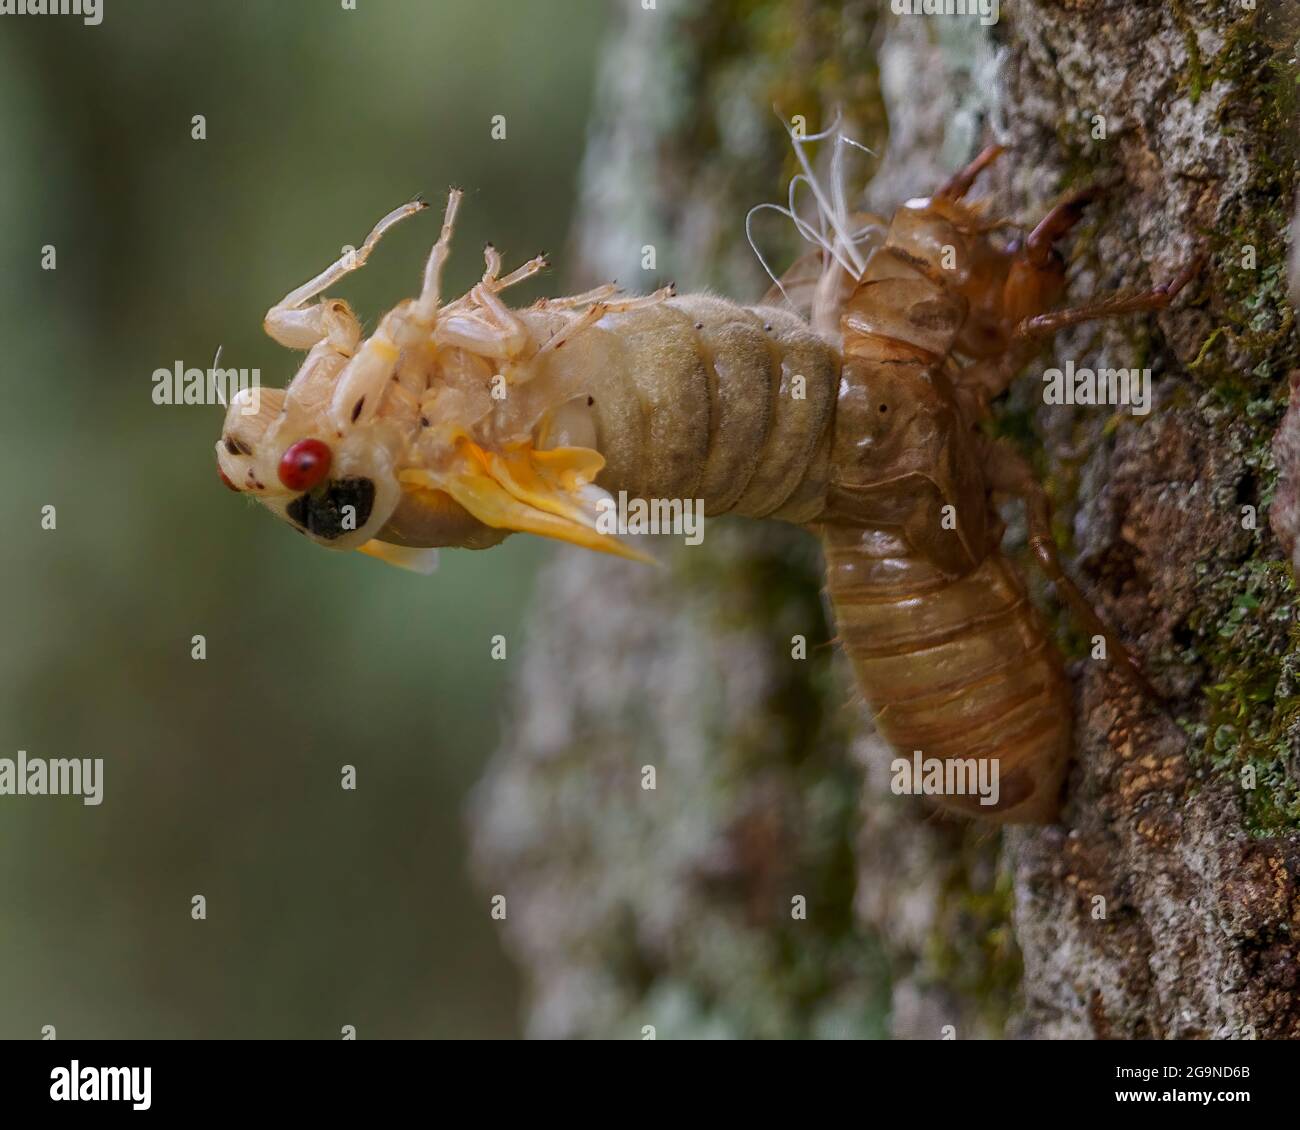 Periodical Cicada molting its exoskeleton after emerging from the ground after 17 years, New Jersey, USA Stock Photo